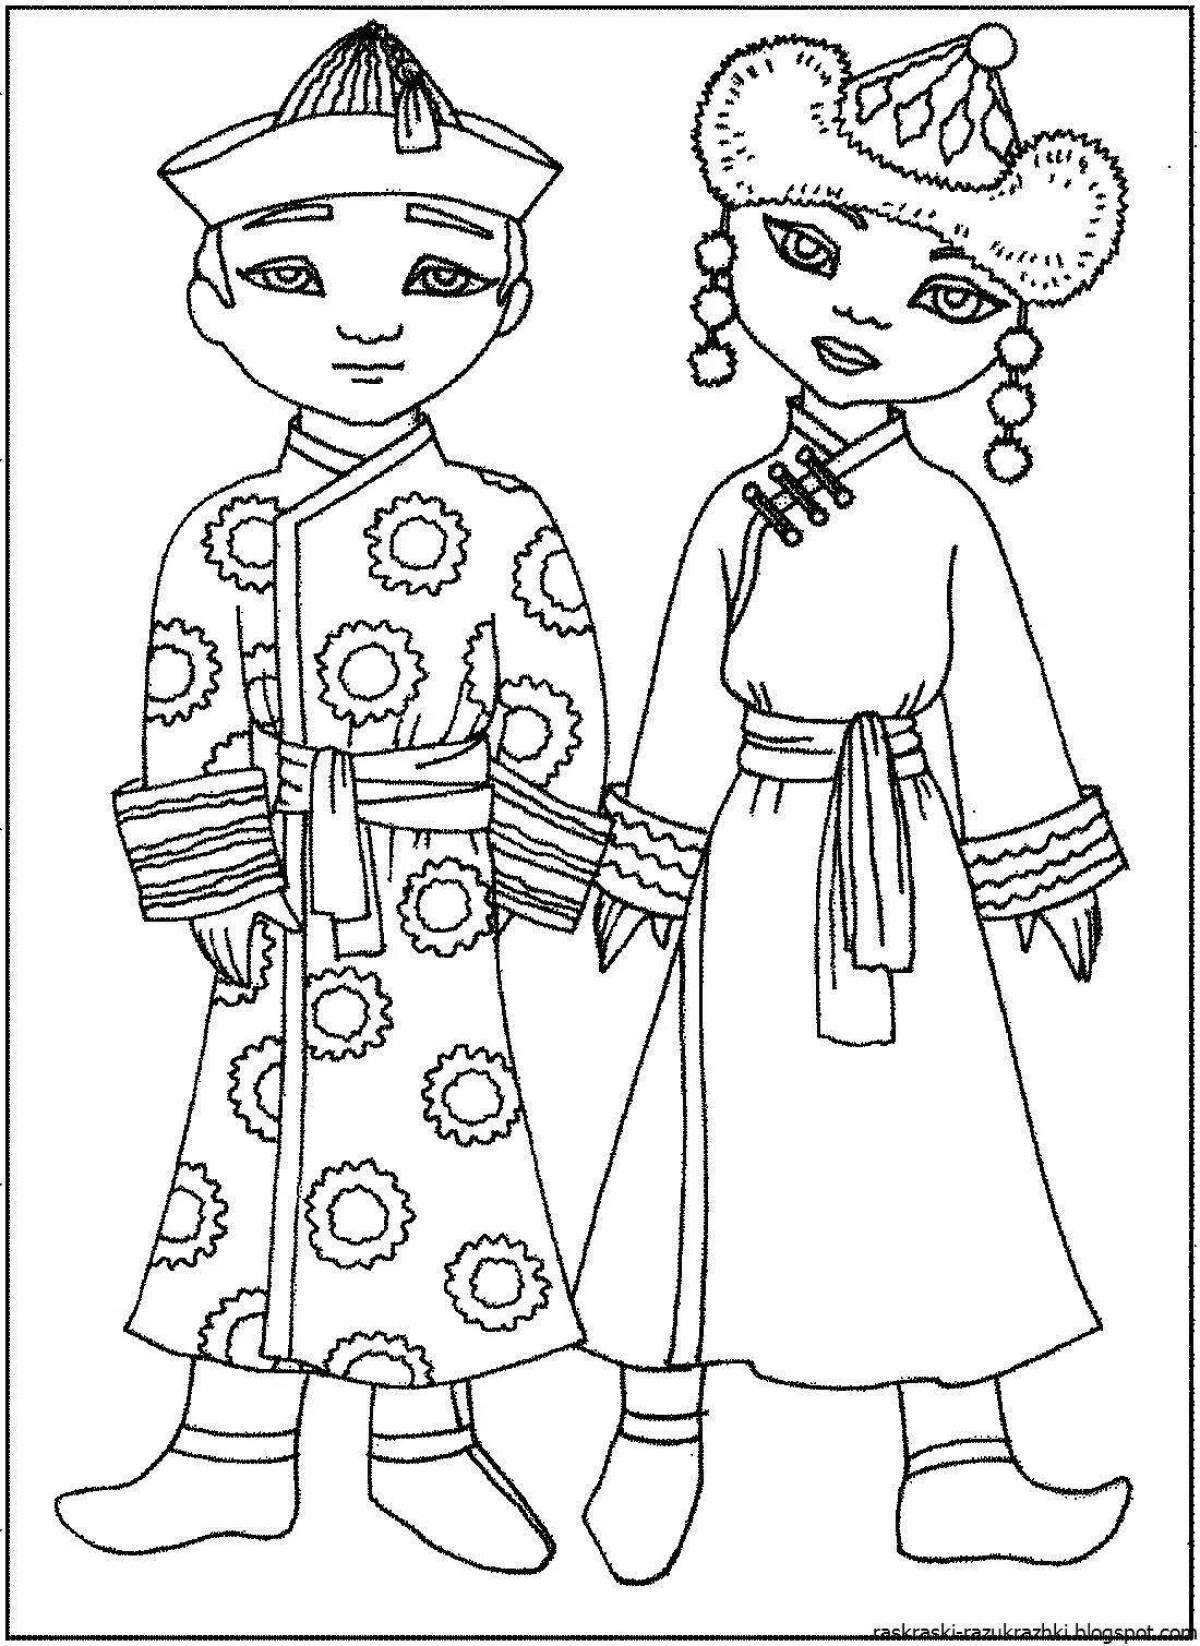 Nauryz holiday coloring for kids